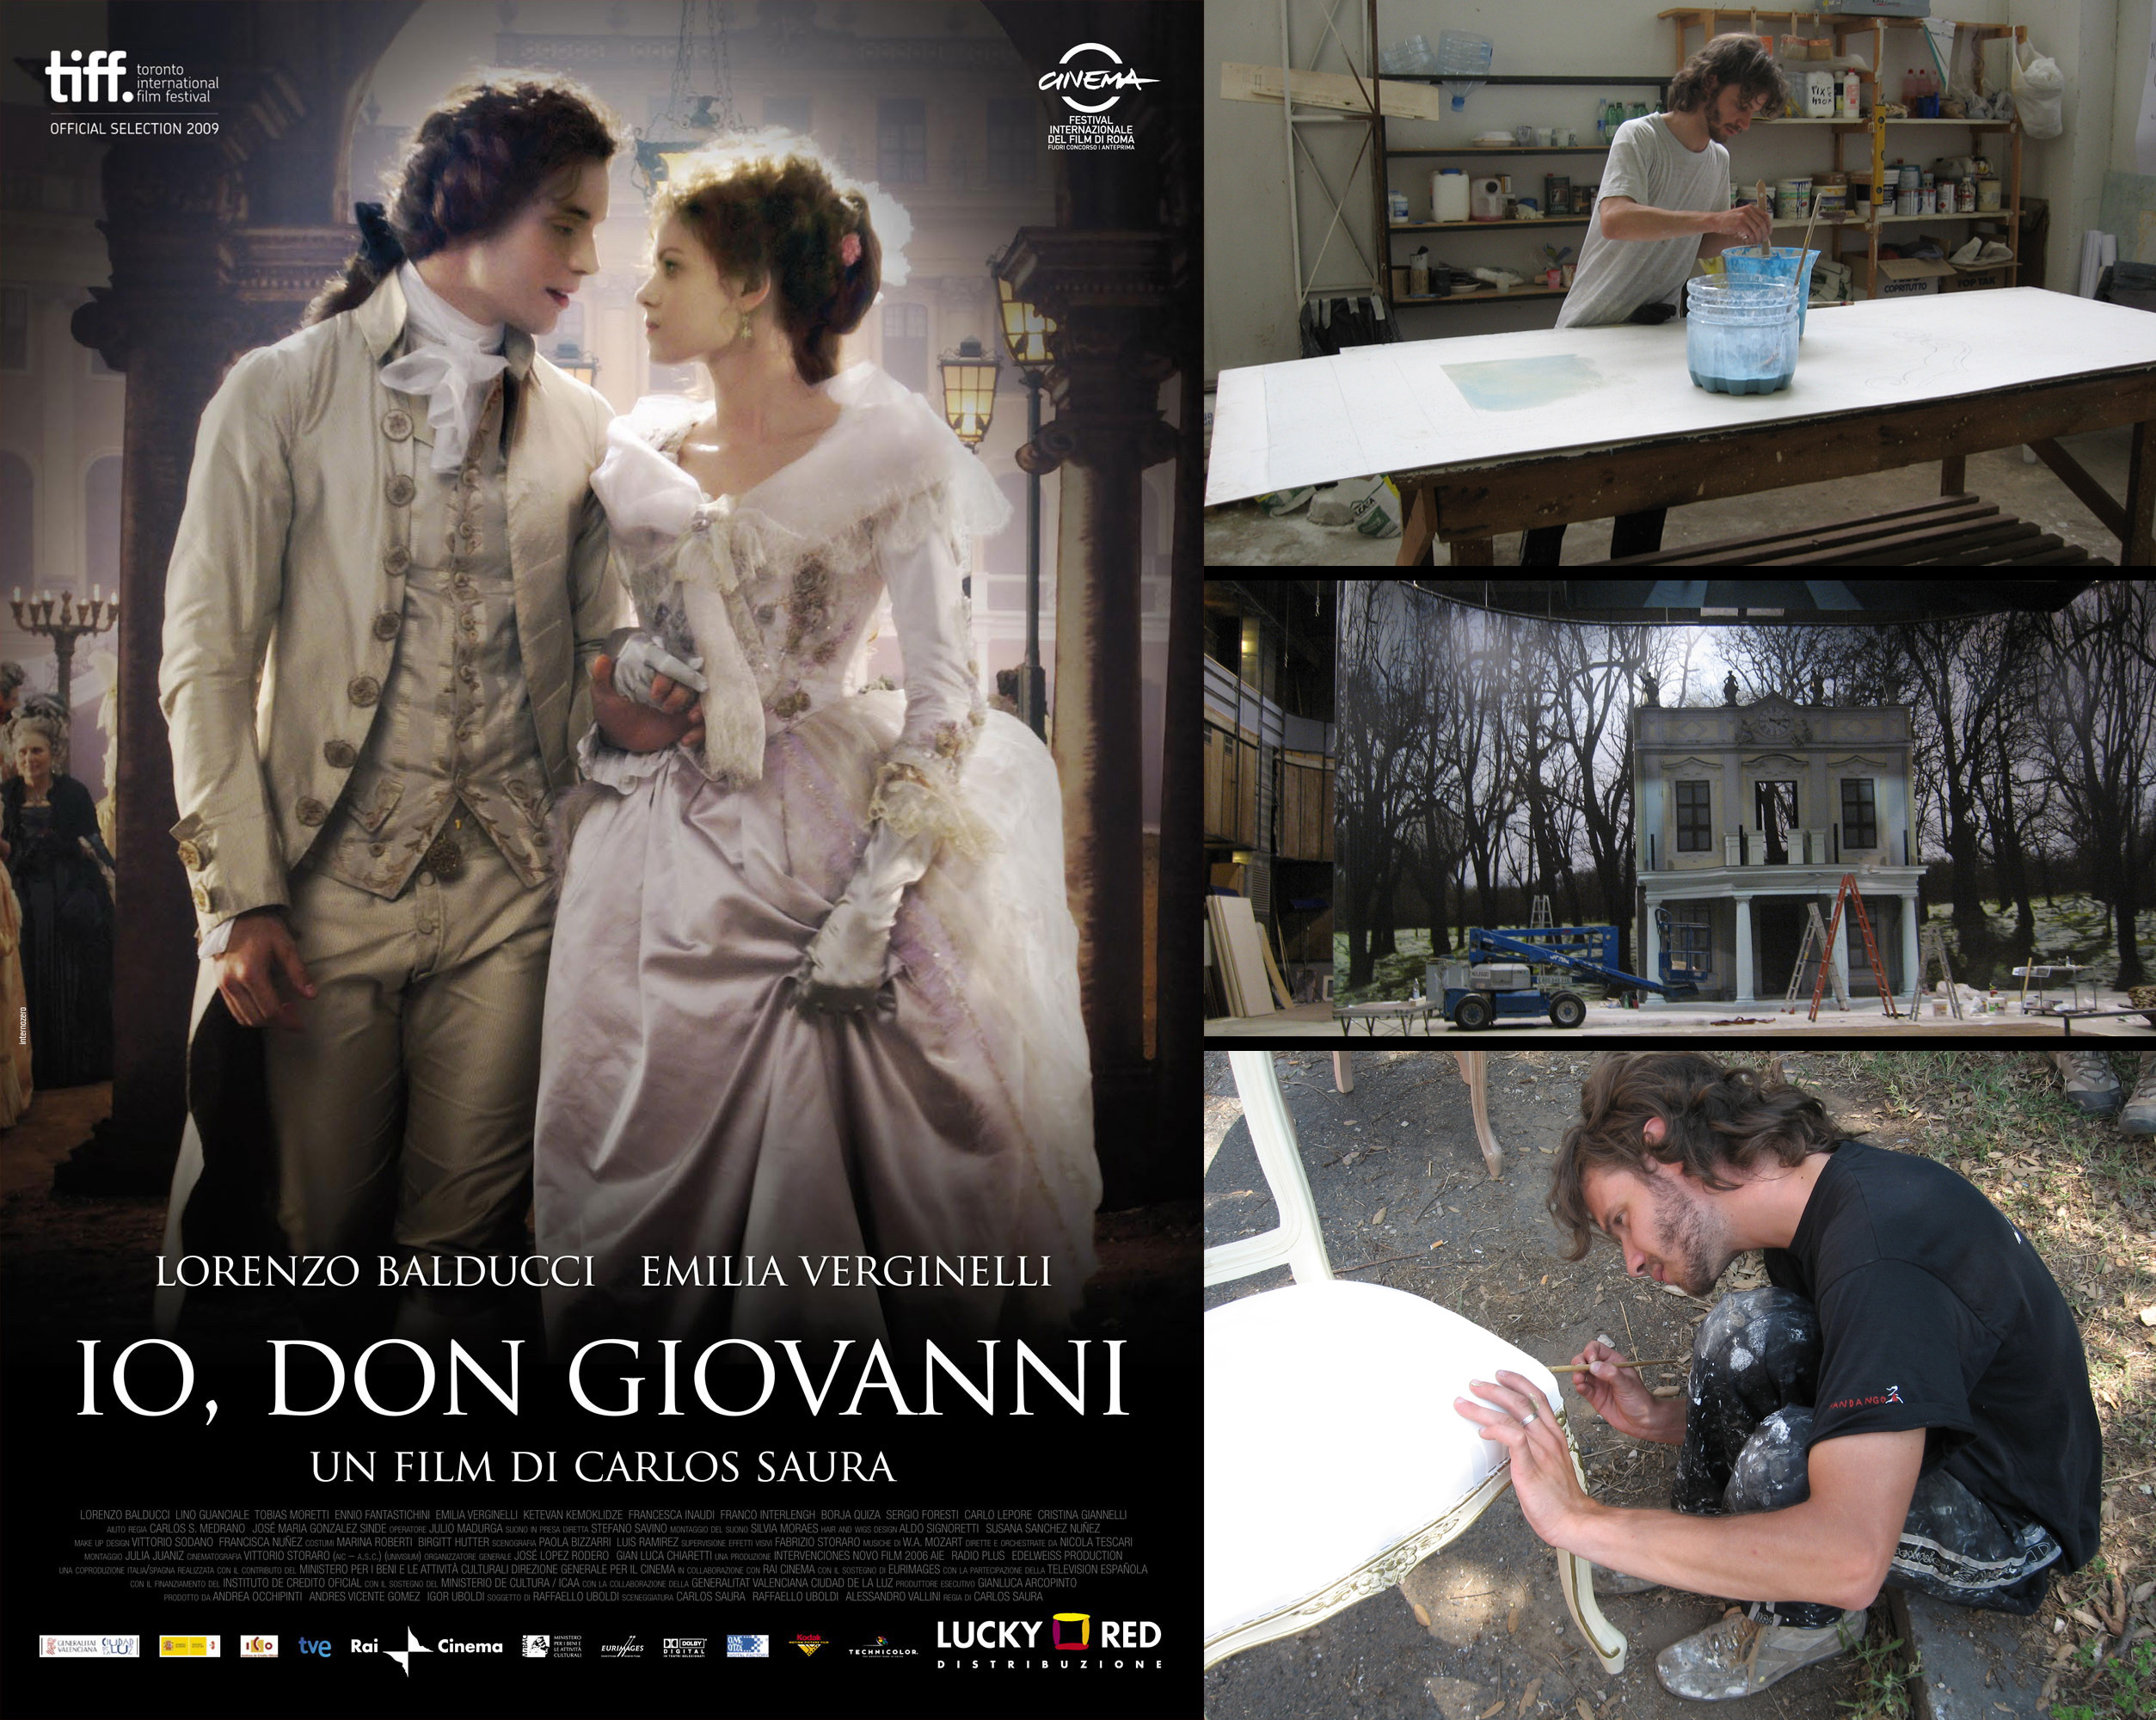 
Set painter in the movie 'Io, Don Giovanni' (2008), directed by Carlos Saura.
Working
